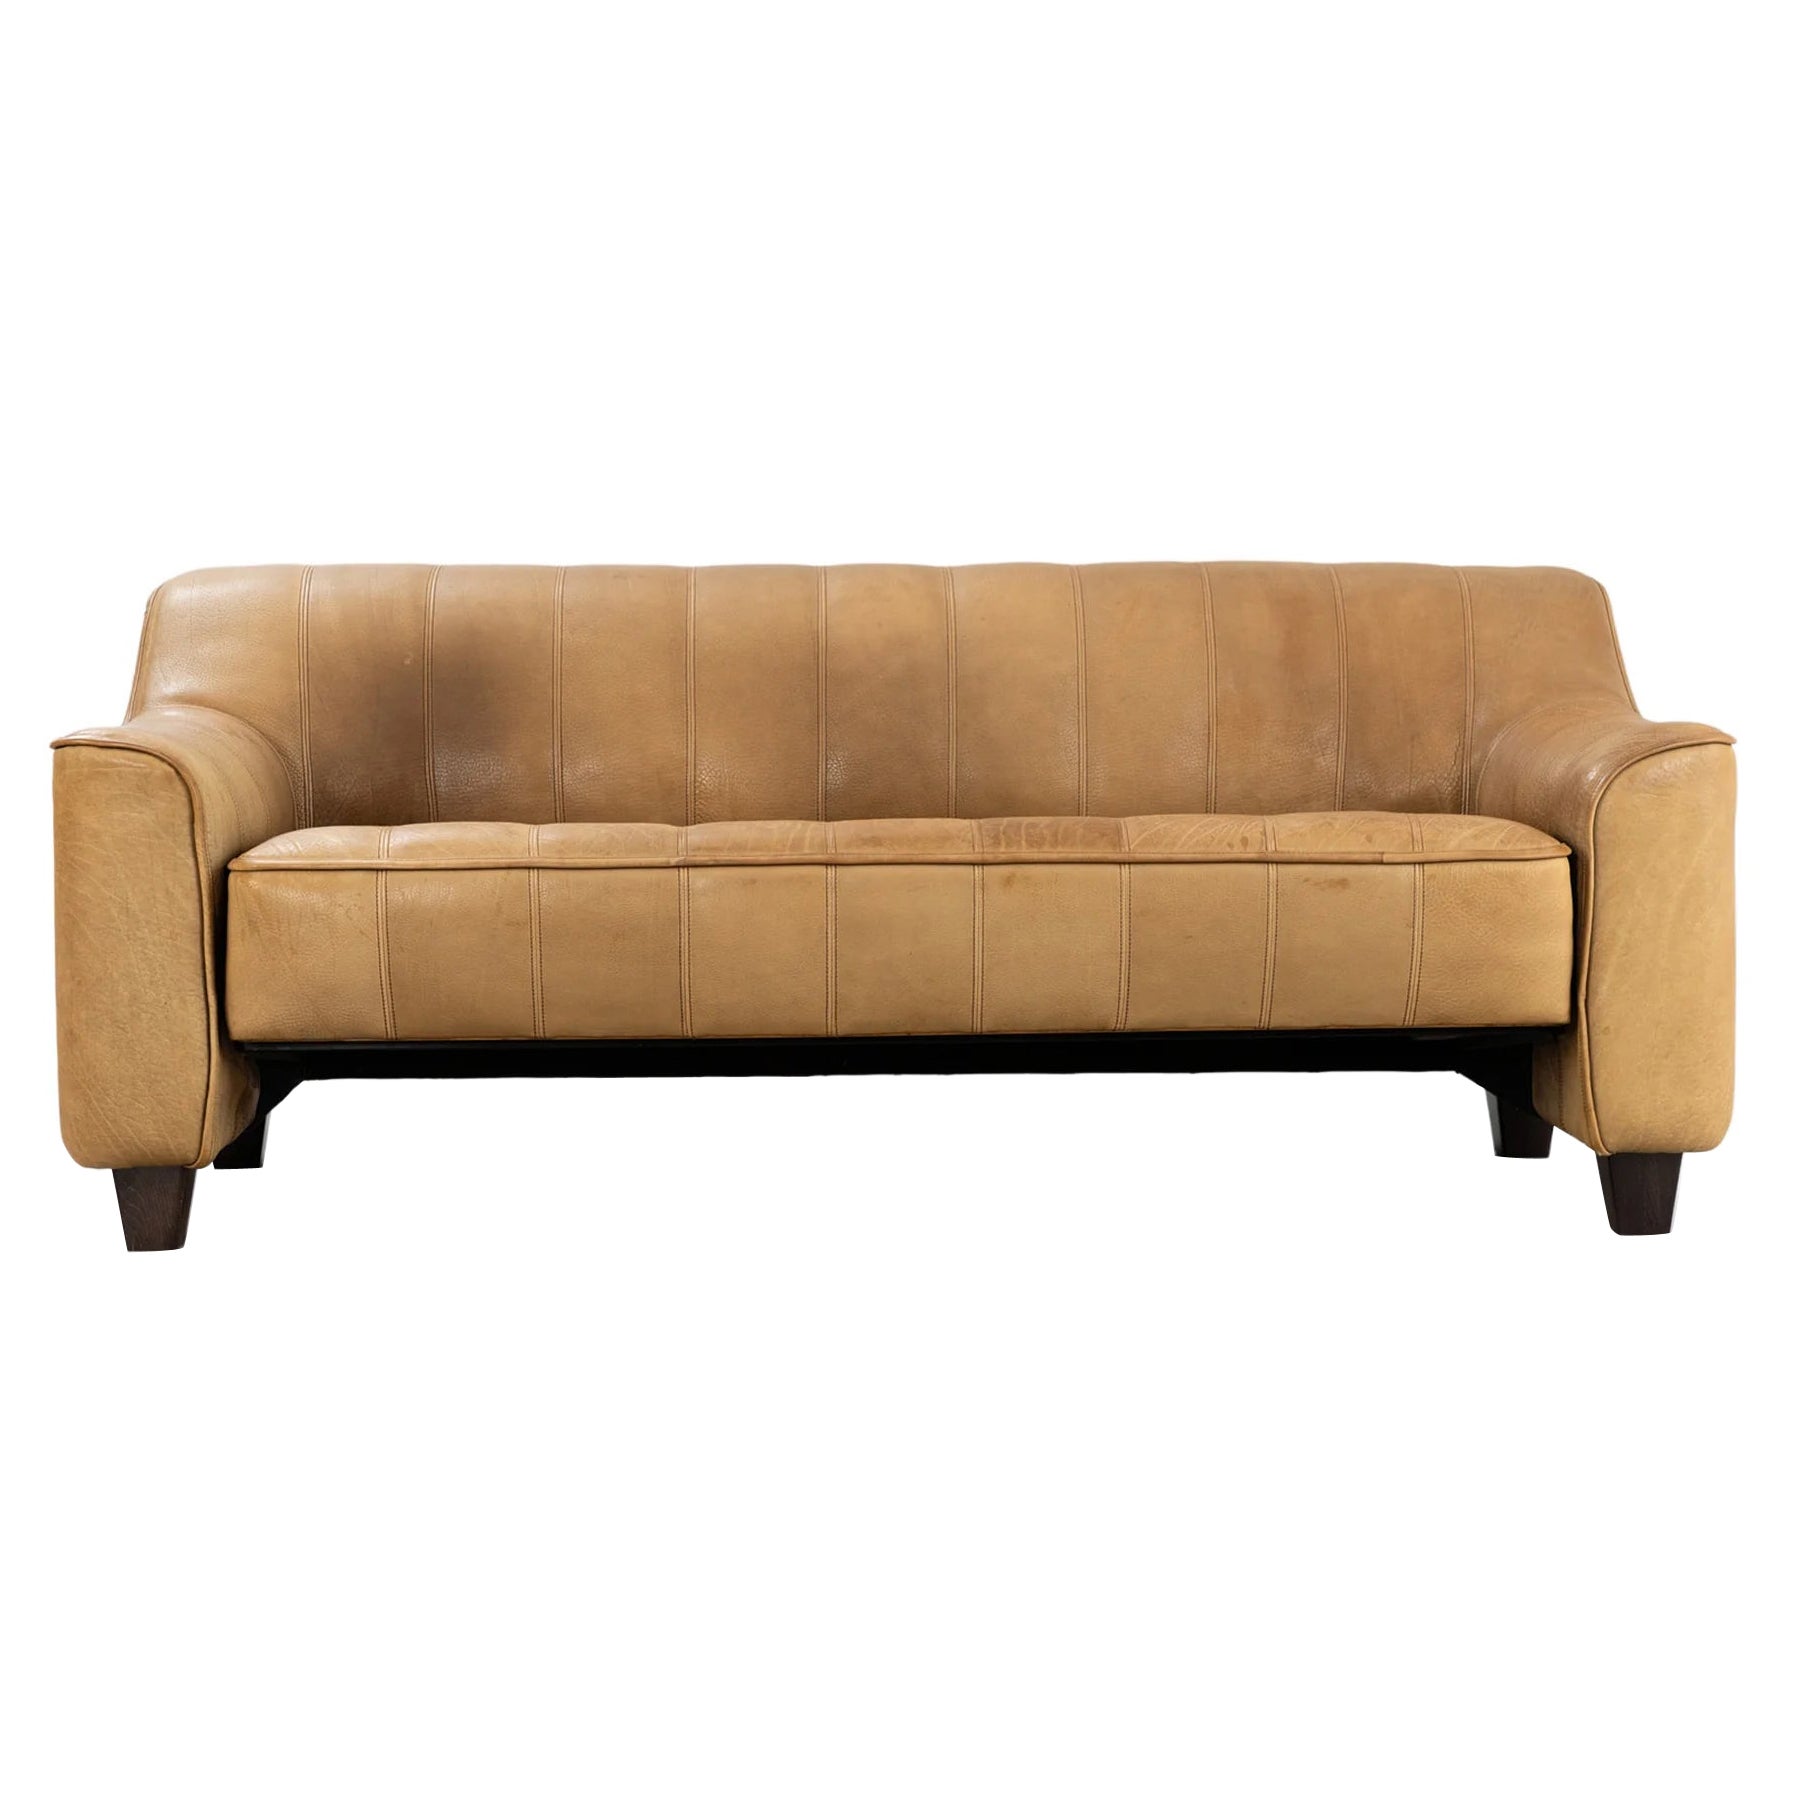 Ds 44 three seat sofa in buffalo leather by desede For Sale